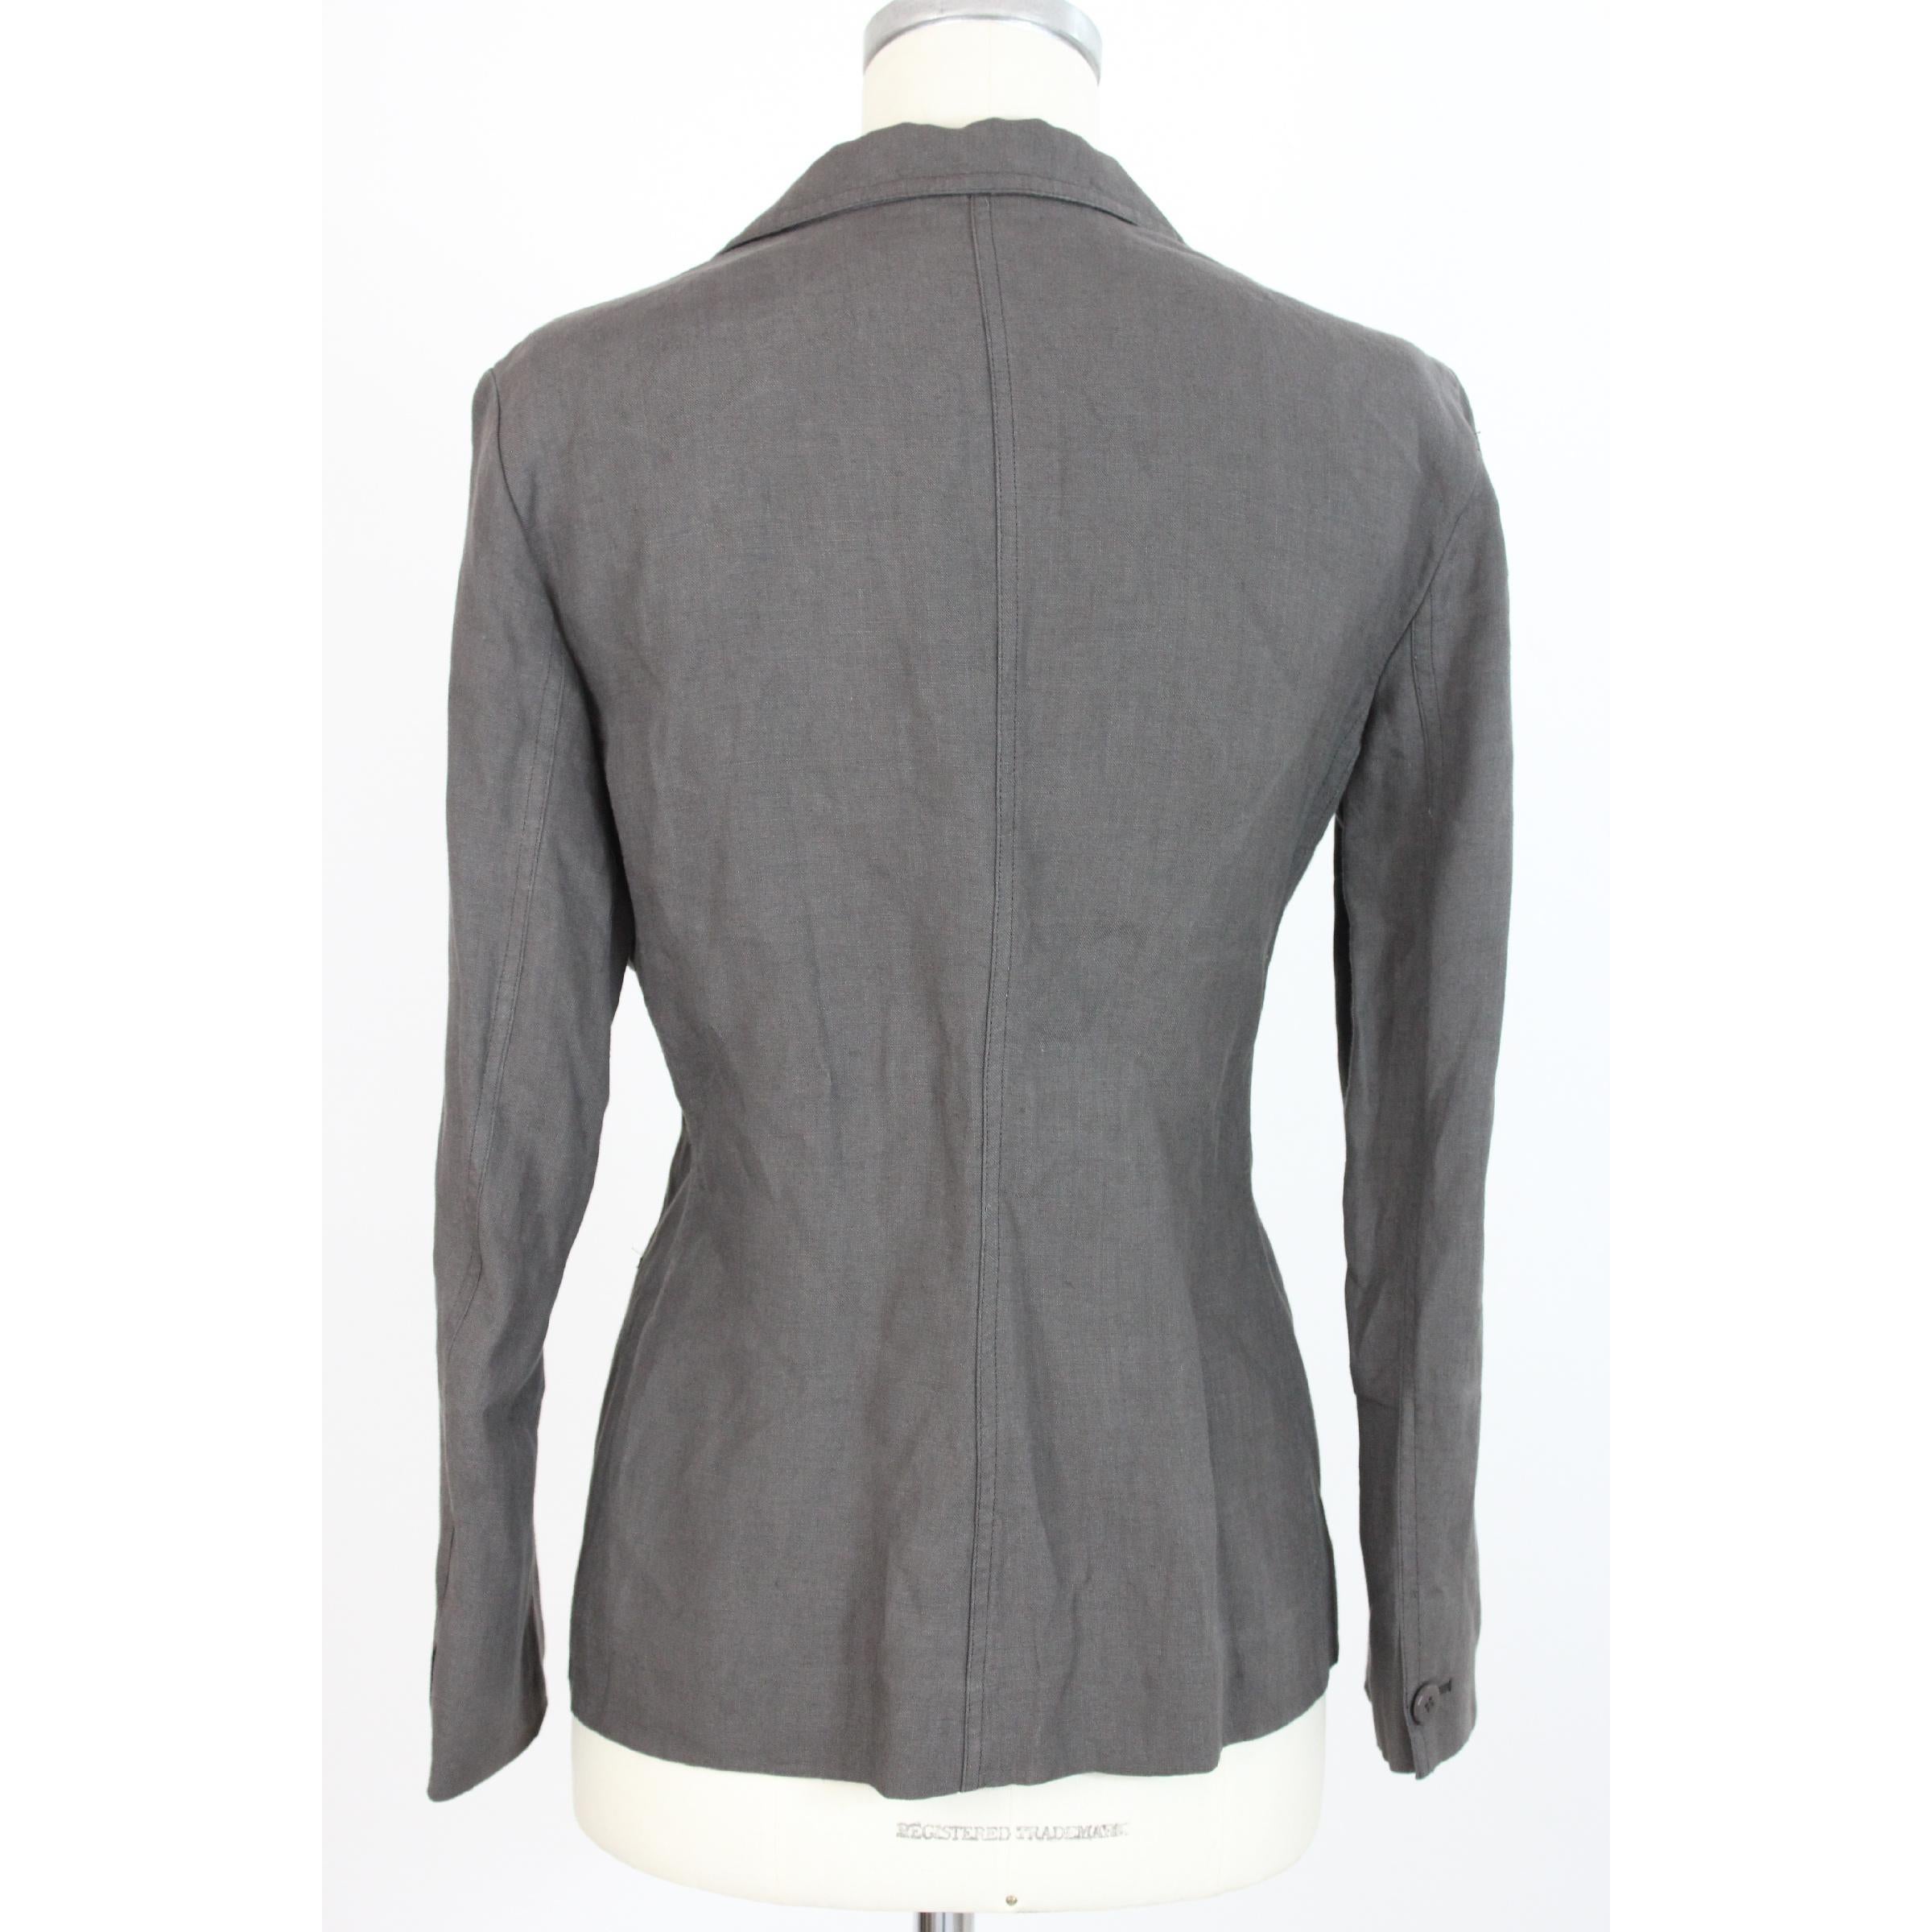 Armani Collezioni vintage women's jacket, brown color, 100% linen. Classic model, two pockets on the sides and one on the chest. Excellent vintage conditions. Made in Italy.
Size: 48 It 14 Us 16 Uk
Shoulder: 46 cm
Sleeve: 57 cm
Bust / Chest: 52